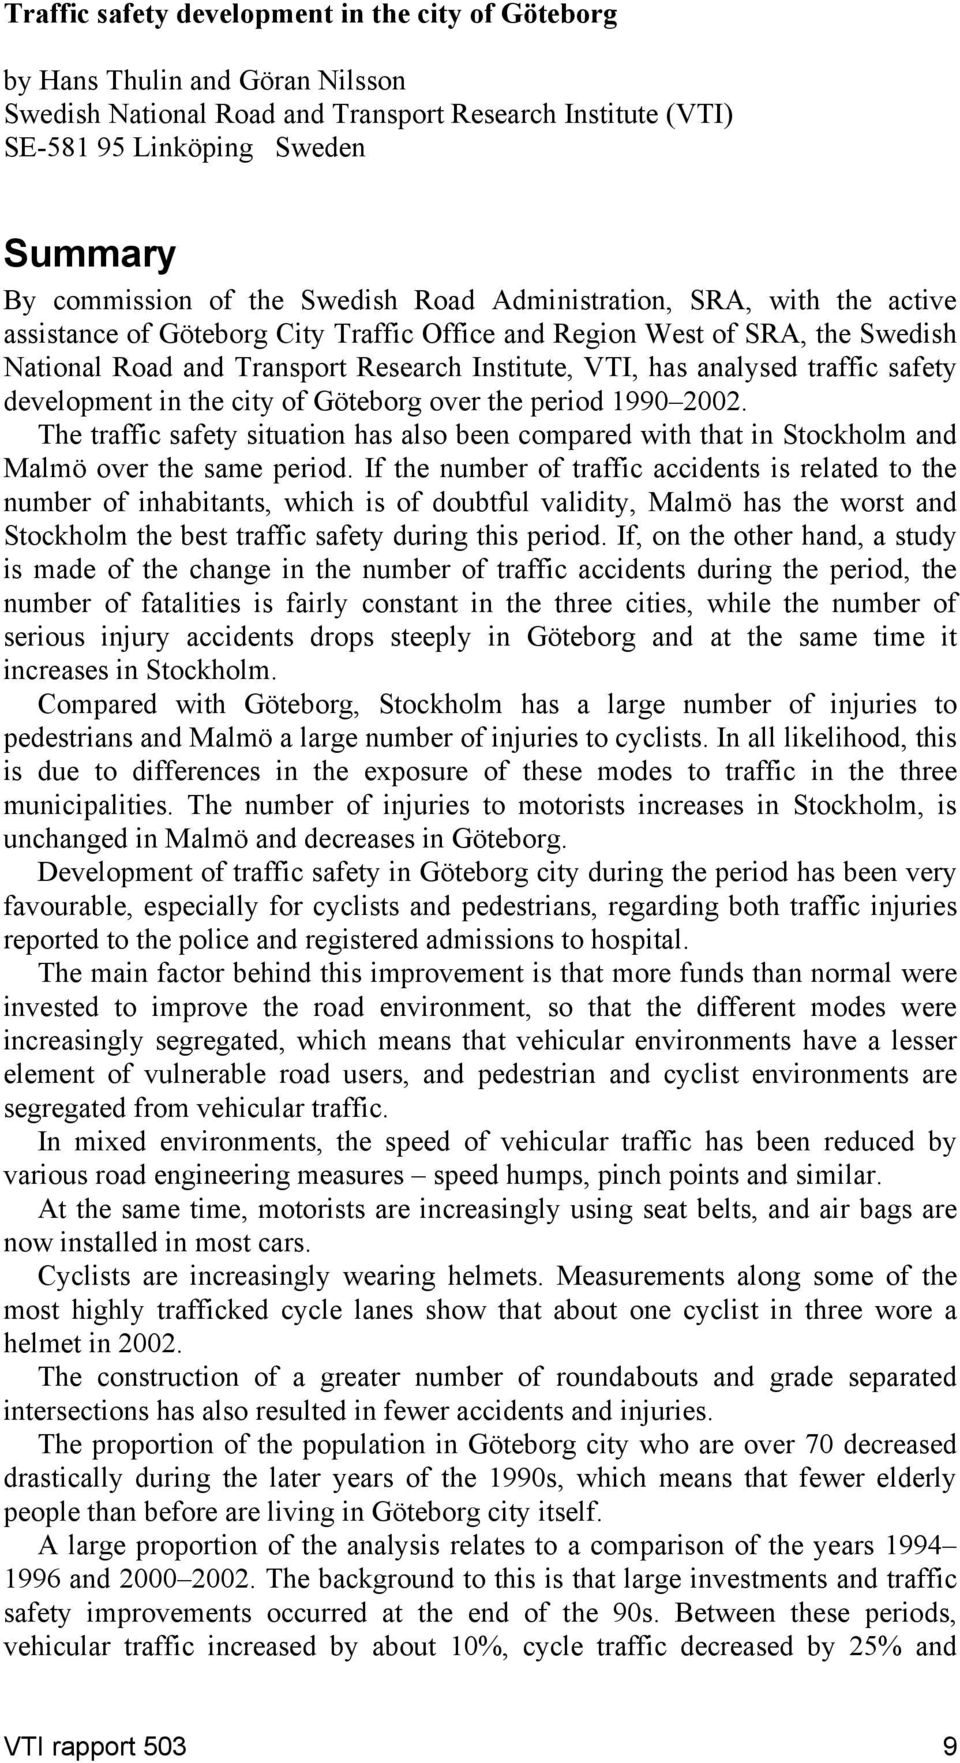 traffic safety development in the city of Göteborg over the period 199 22. The traffic safety situation has also been compared with that in Stockholm and Malmö over the same period.